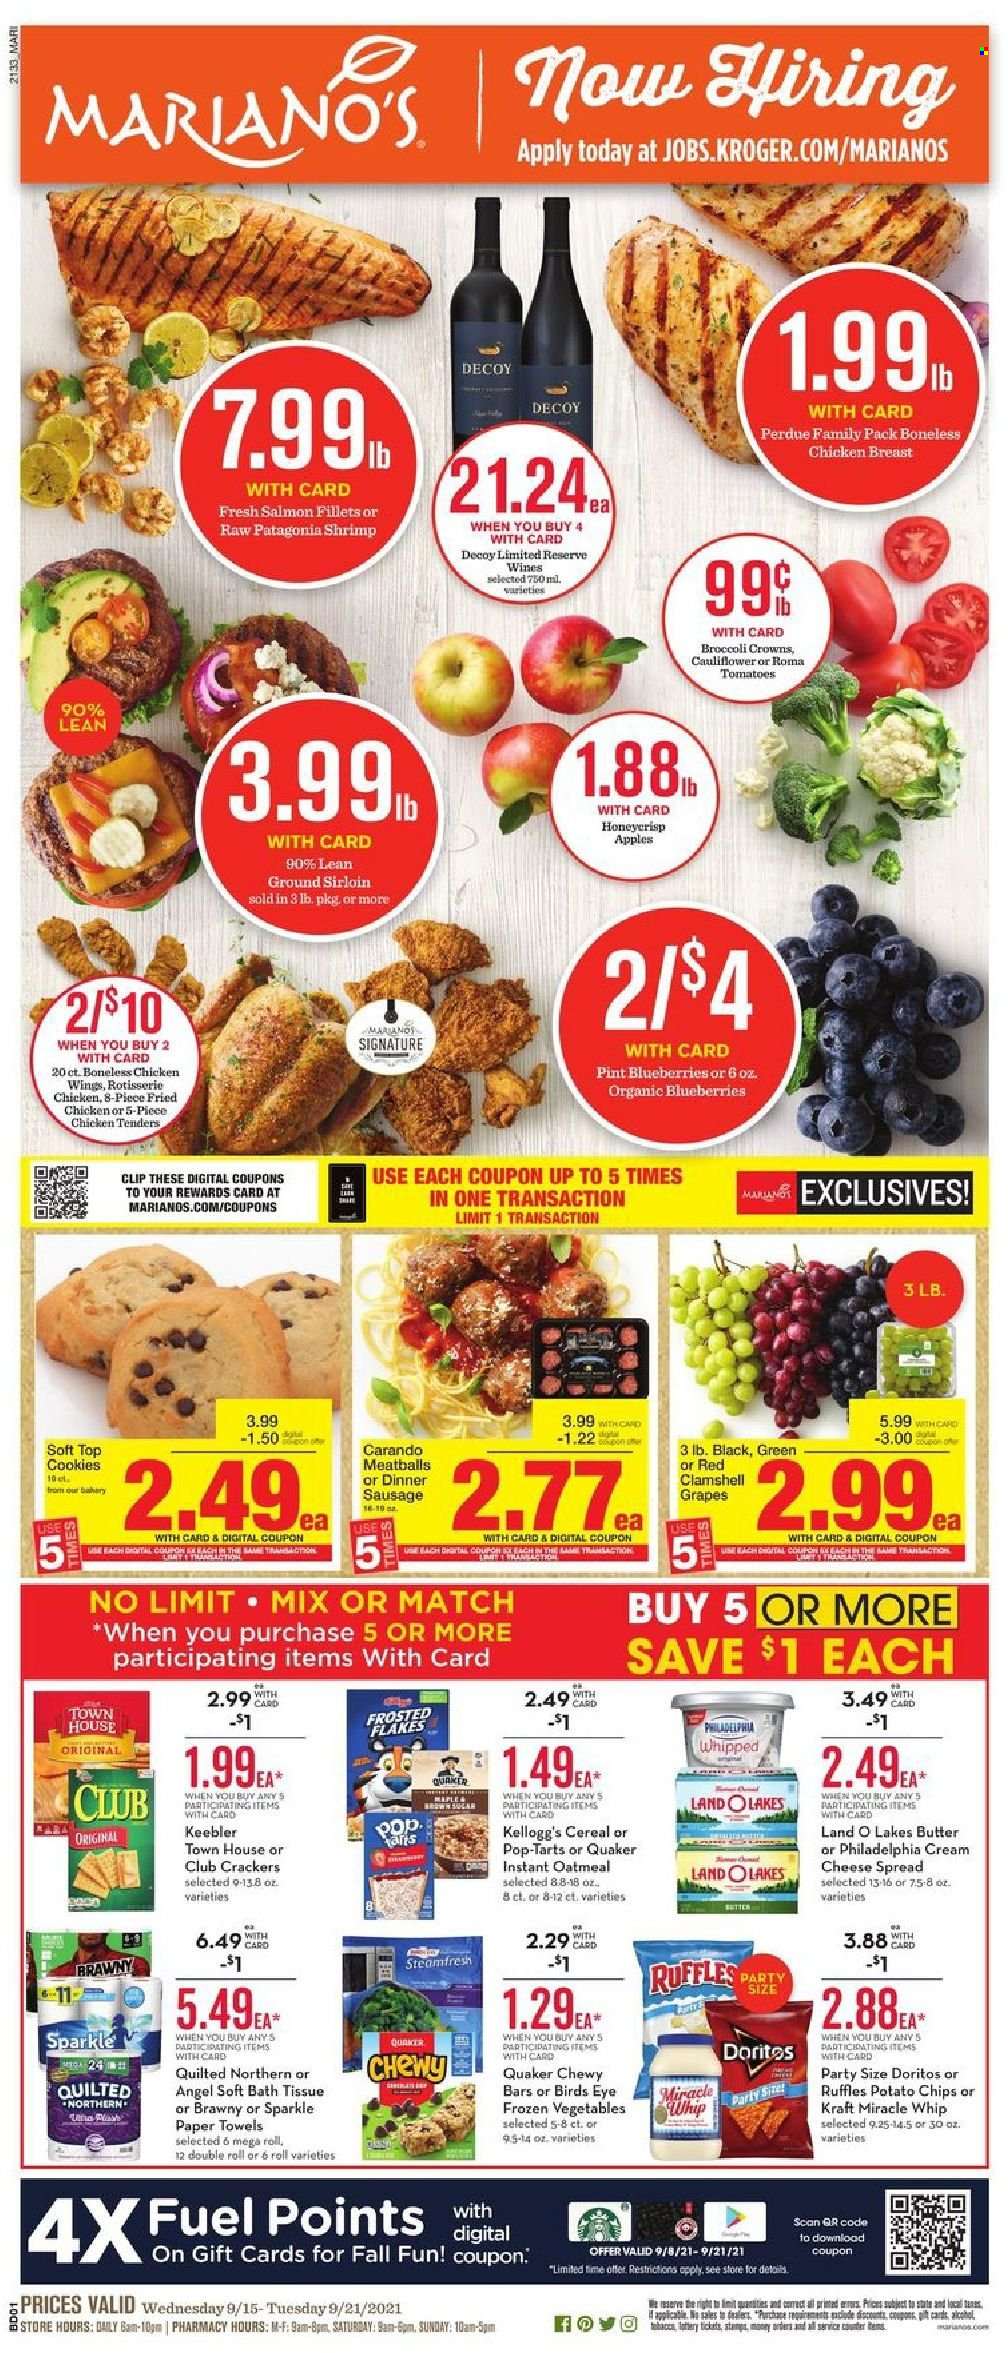 thumbnail - Mariano’s Flyer - 09/15/2021 - 09/21/2021 - Sales products - tomatoes, blueberries, grapes, salmon, salmon fillet, shrimps, chicken roast, chicken tenders, meatballs, Bird's Eye, Quaker, Perdue®, Kraft®, sausage, cheese spread, cream cheese, Philadelphia, butter, Miracle Whip, frozen vegetables, chicken wings, cookies, crackers, Kellogg's, Pop-Tarts, Keebler, Doritos, potato chips, Ruffles, oatmeal, cereals, Frosted Flakes, chicken breasts. Page 1.